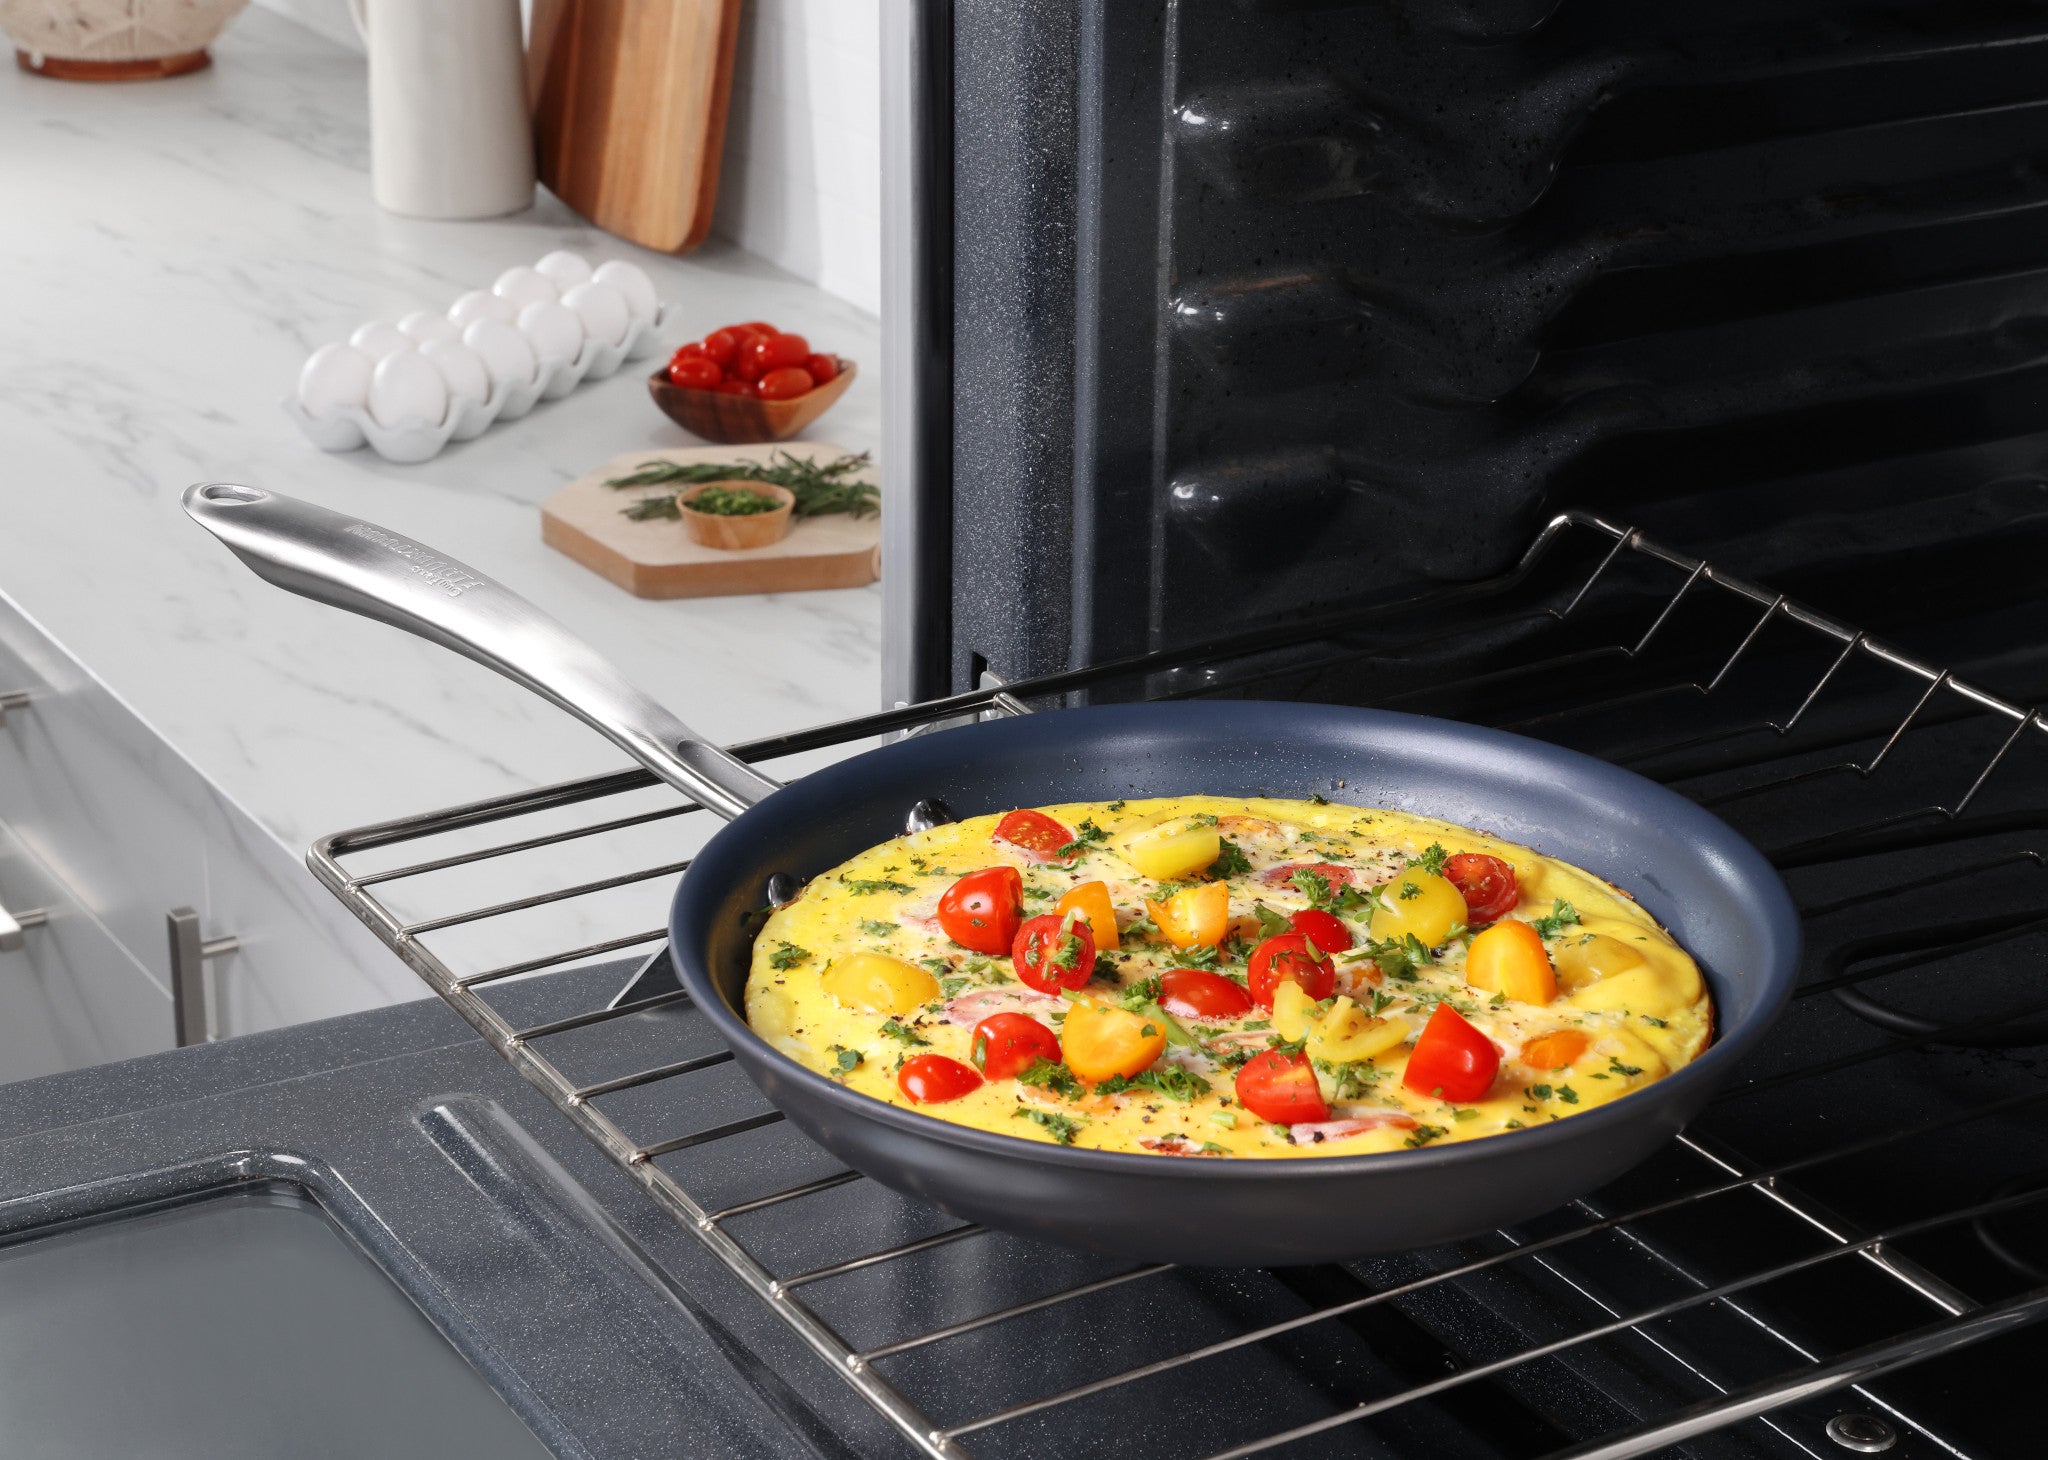 Guy Fieri's Flavortown Laser Titanium 2pcs 10in-12in Frying Pan Set with Frittata